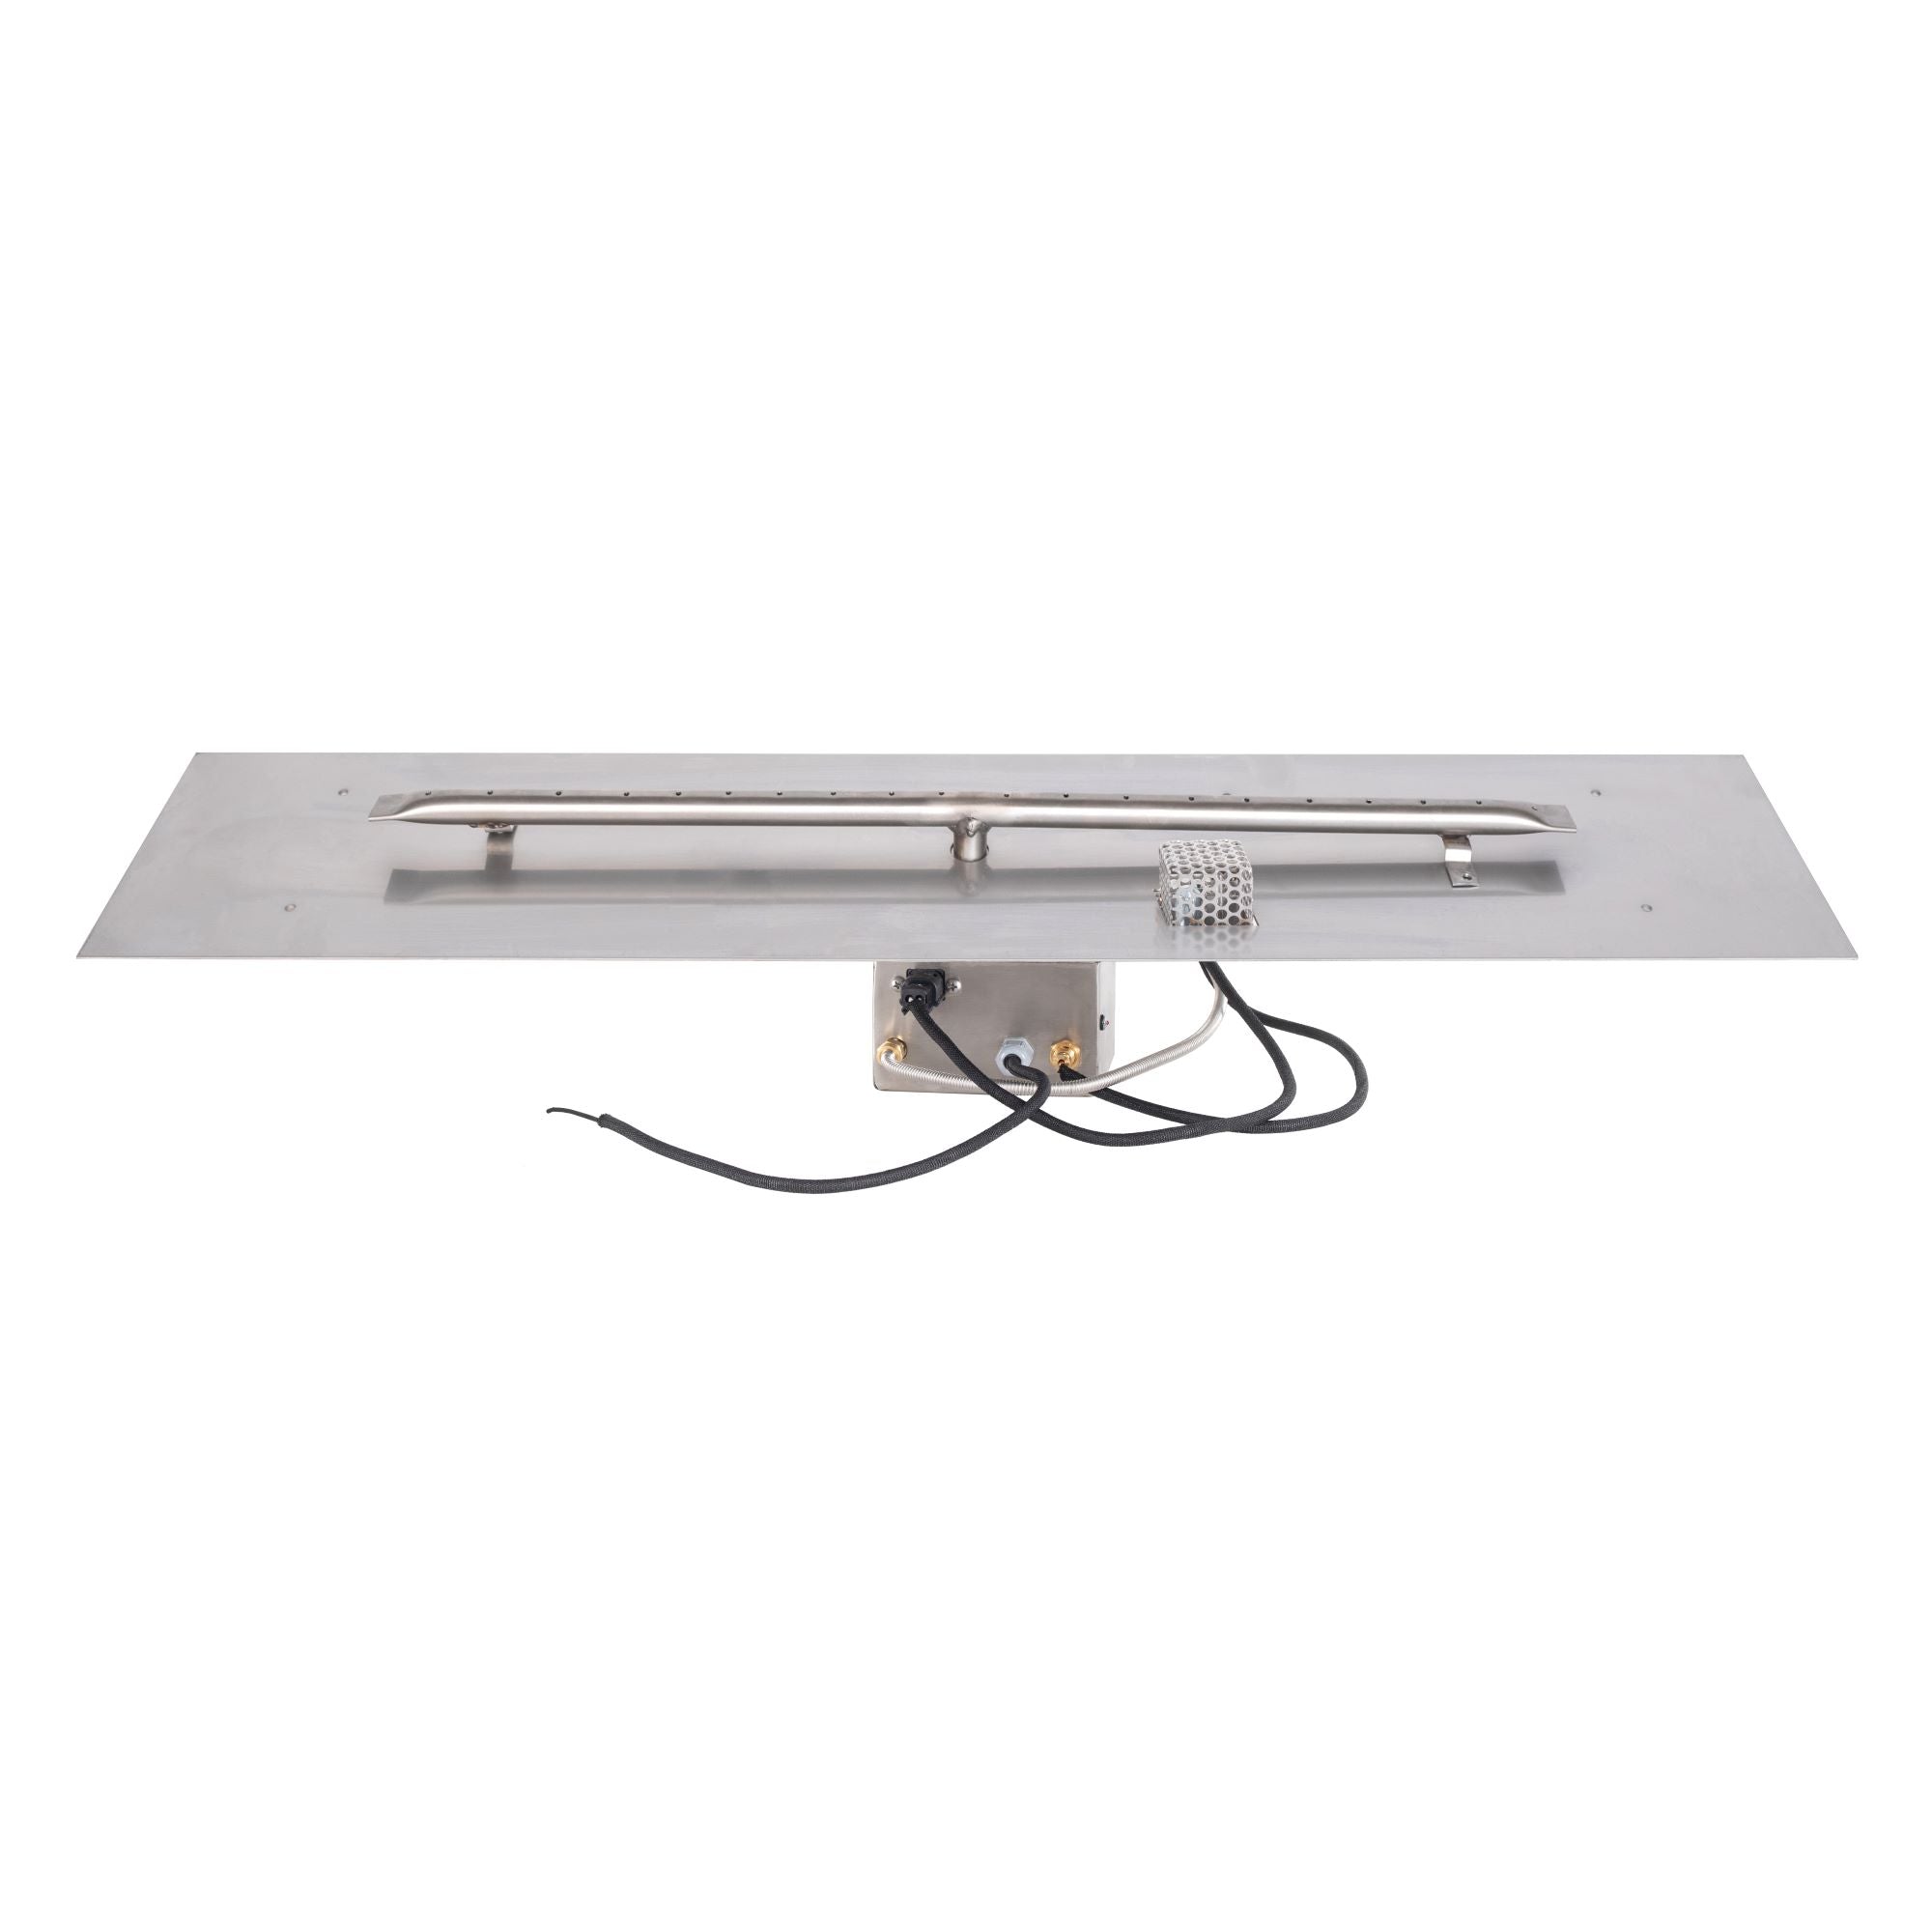 The Outdoor Plus Rectangular Flat Pan 6" with Stainless Steel Linear Burner